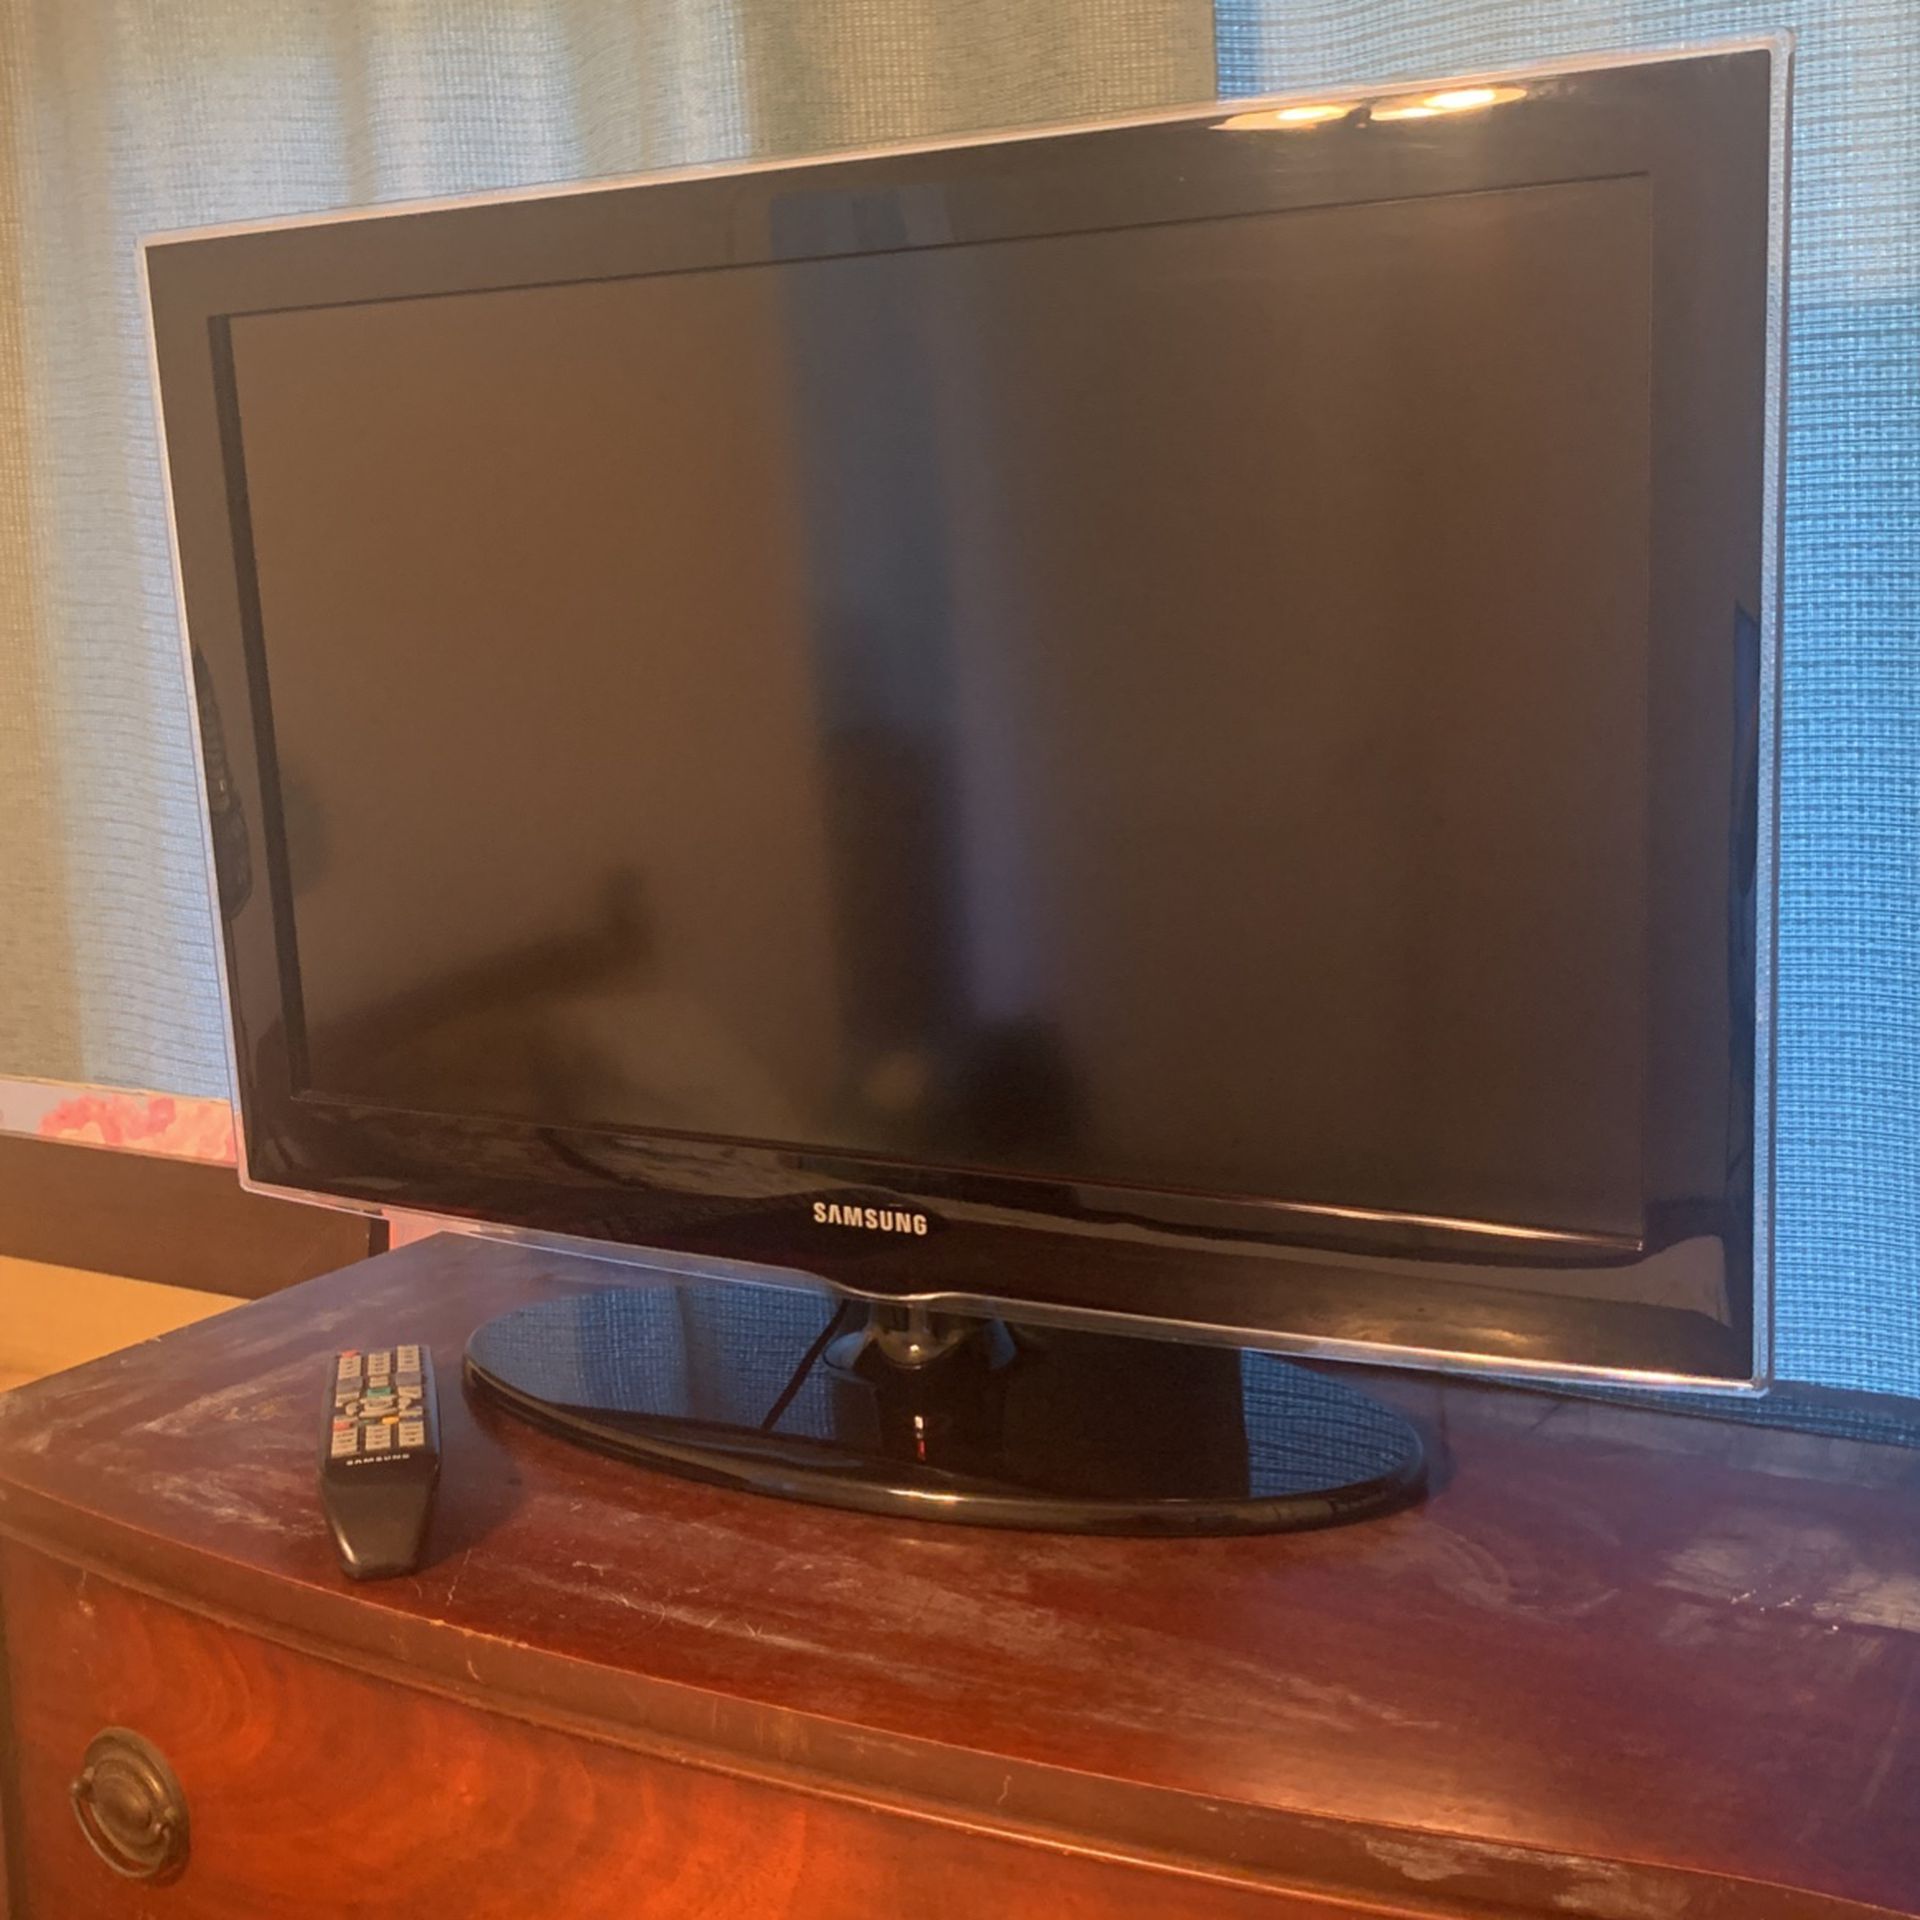 Samsung Flat Screen 32” Television.       Remote and Antenna Included        JUST REDUCED 